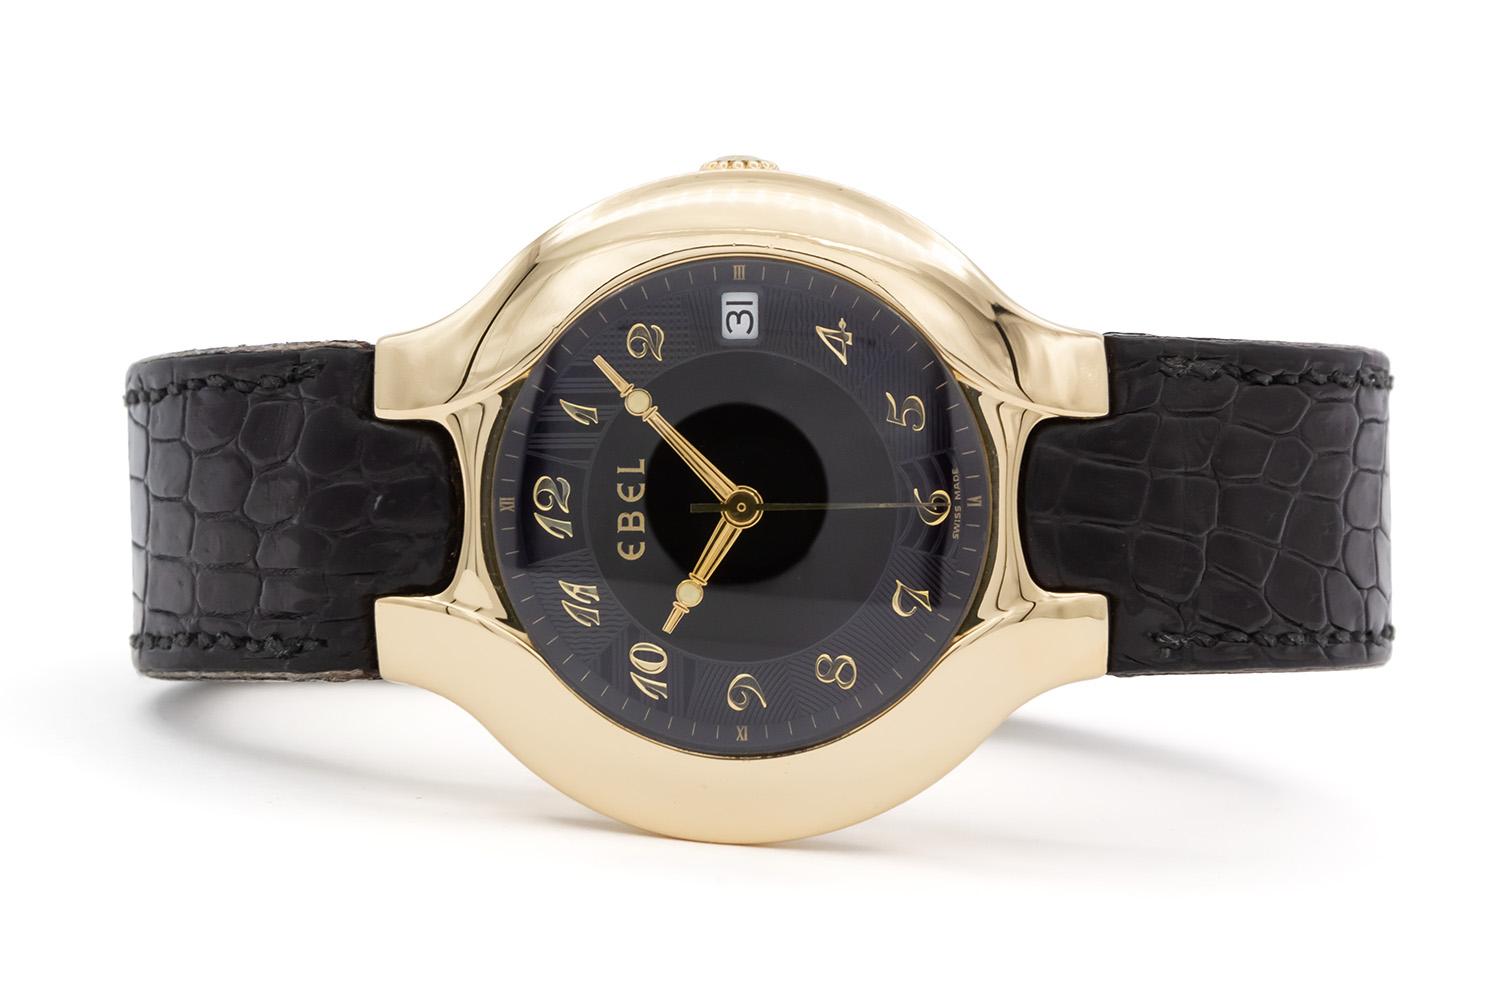 We are pleased to offer this Ebel 18k Yellow Gold Lichine Watch. This watch features a solid gold 37.5mm case, black Arabic dial with date aperture at 3 o'clock, Swiss automatic movement and genuine Ebel black leather strap with 18k yellow gold